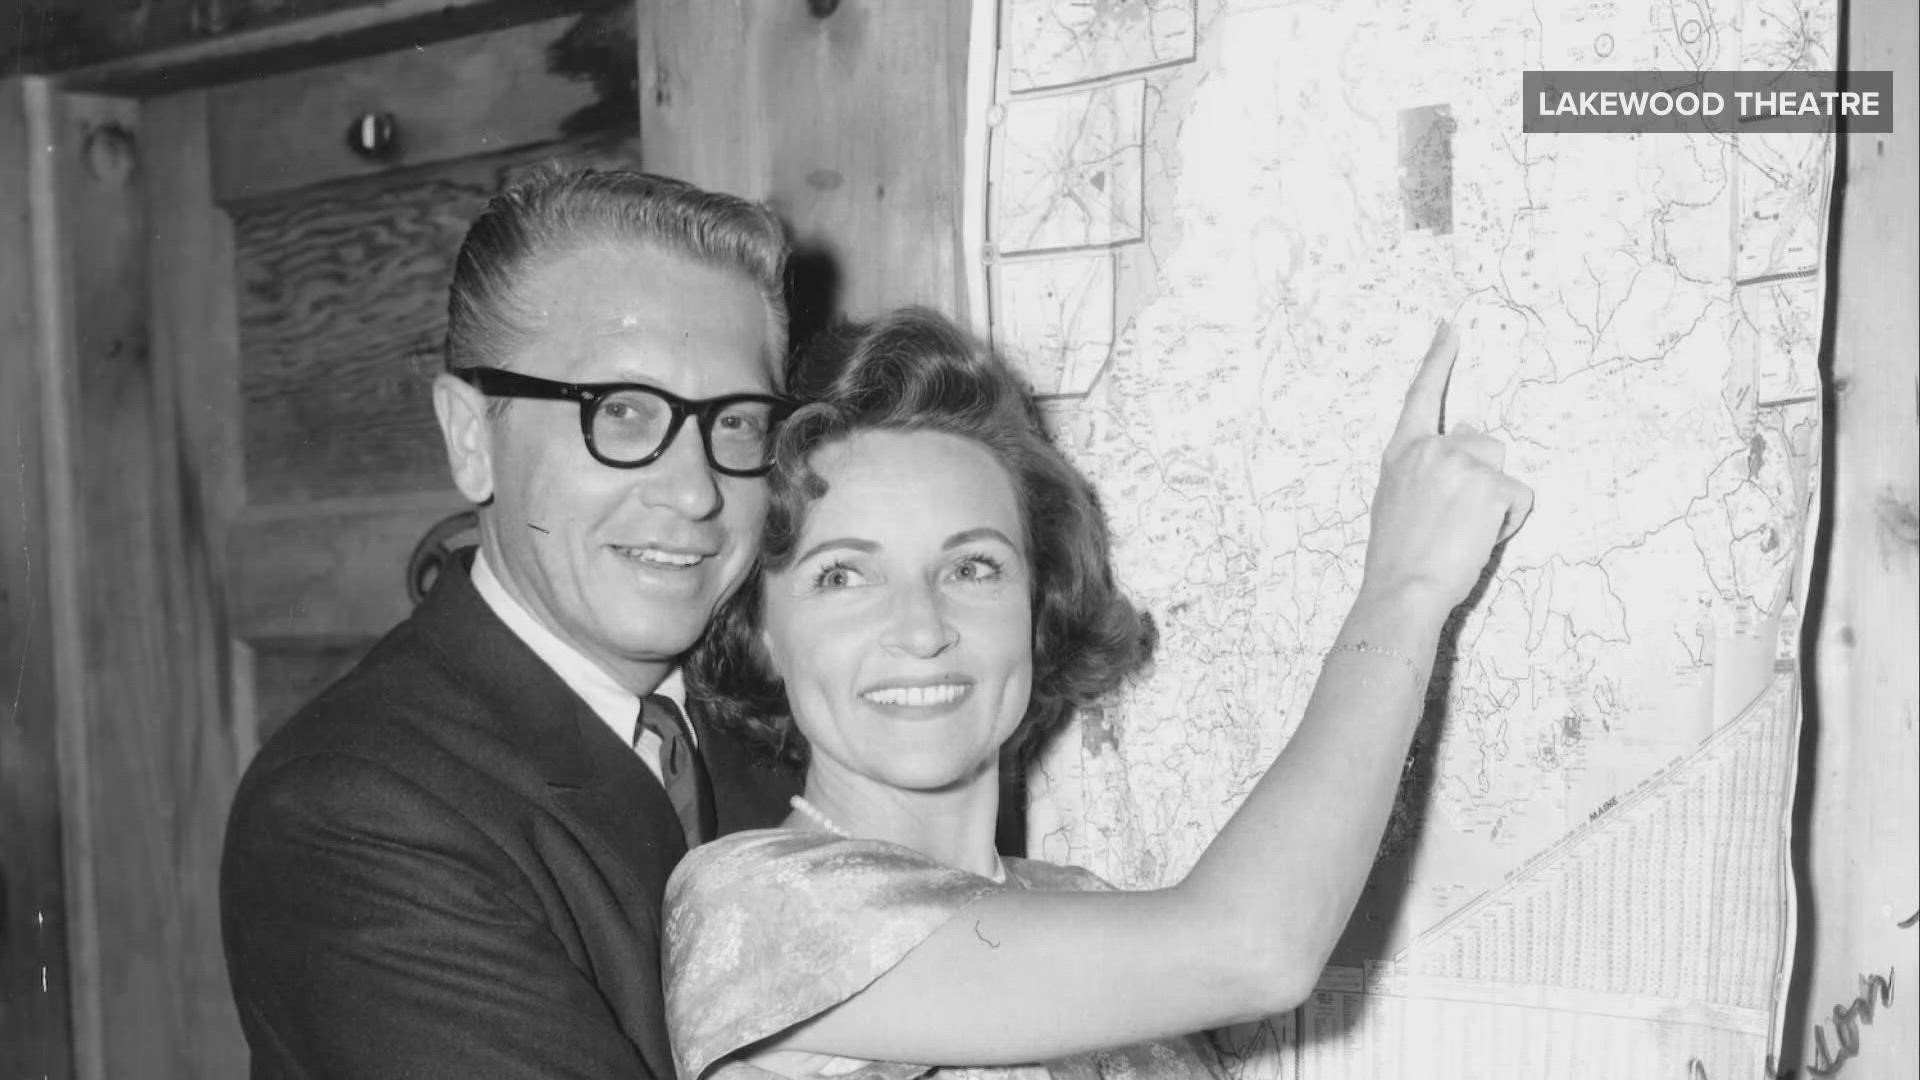 Betty White fell in love with her husband Allen Ludden while performing at the Lakewood Theatre in Madison during the summer of 1962.